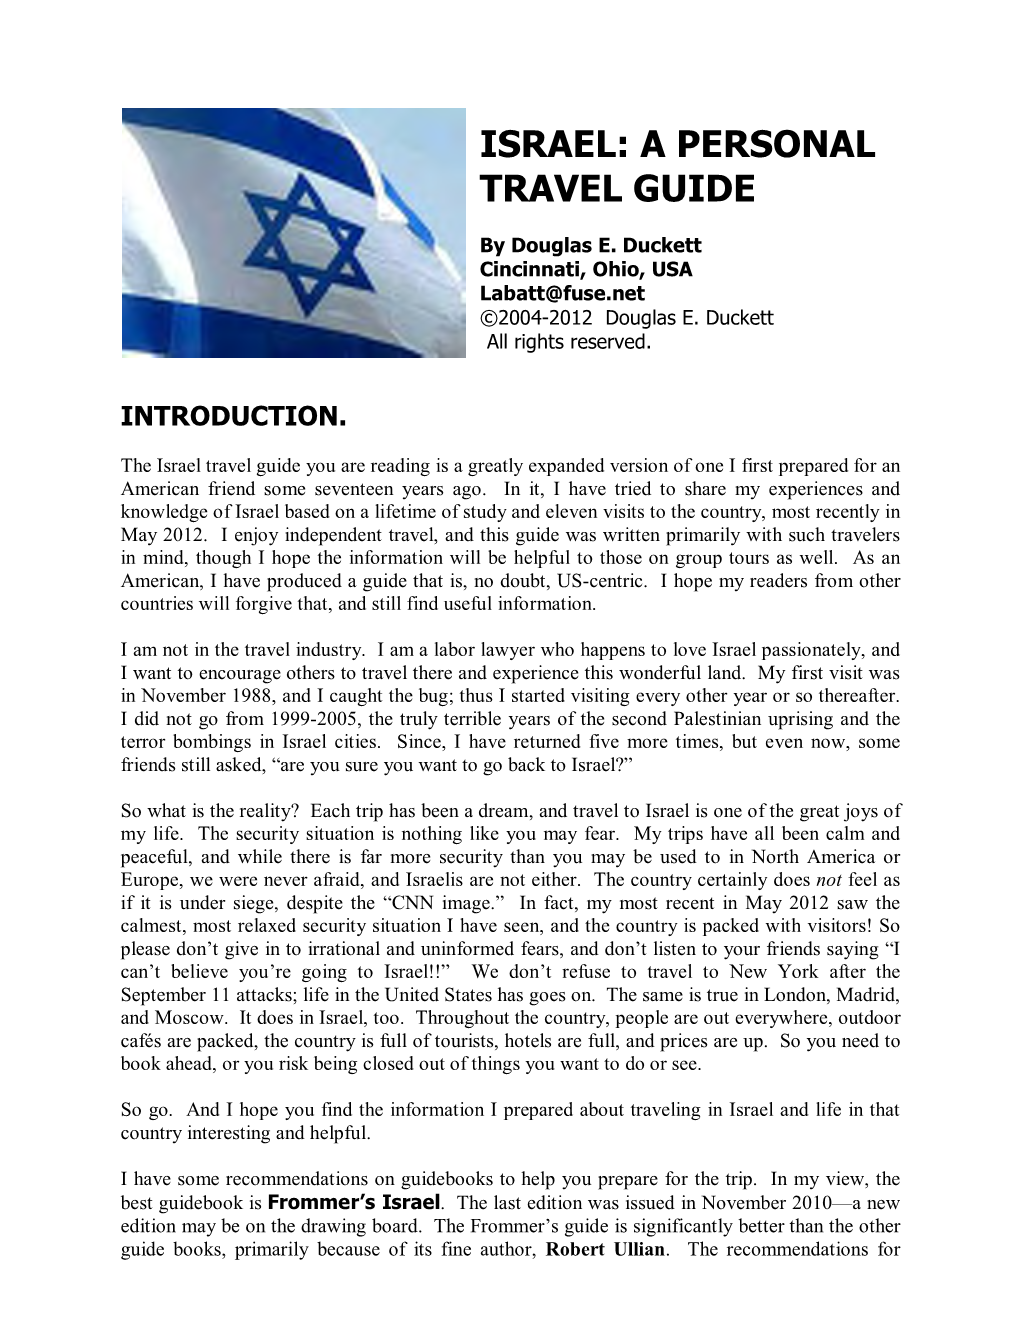 Israel: a Personal Travel Guide